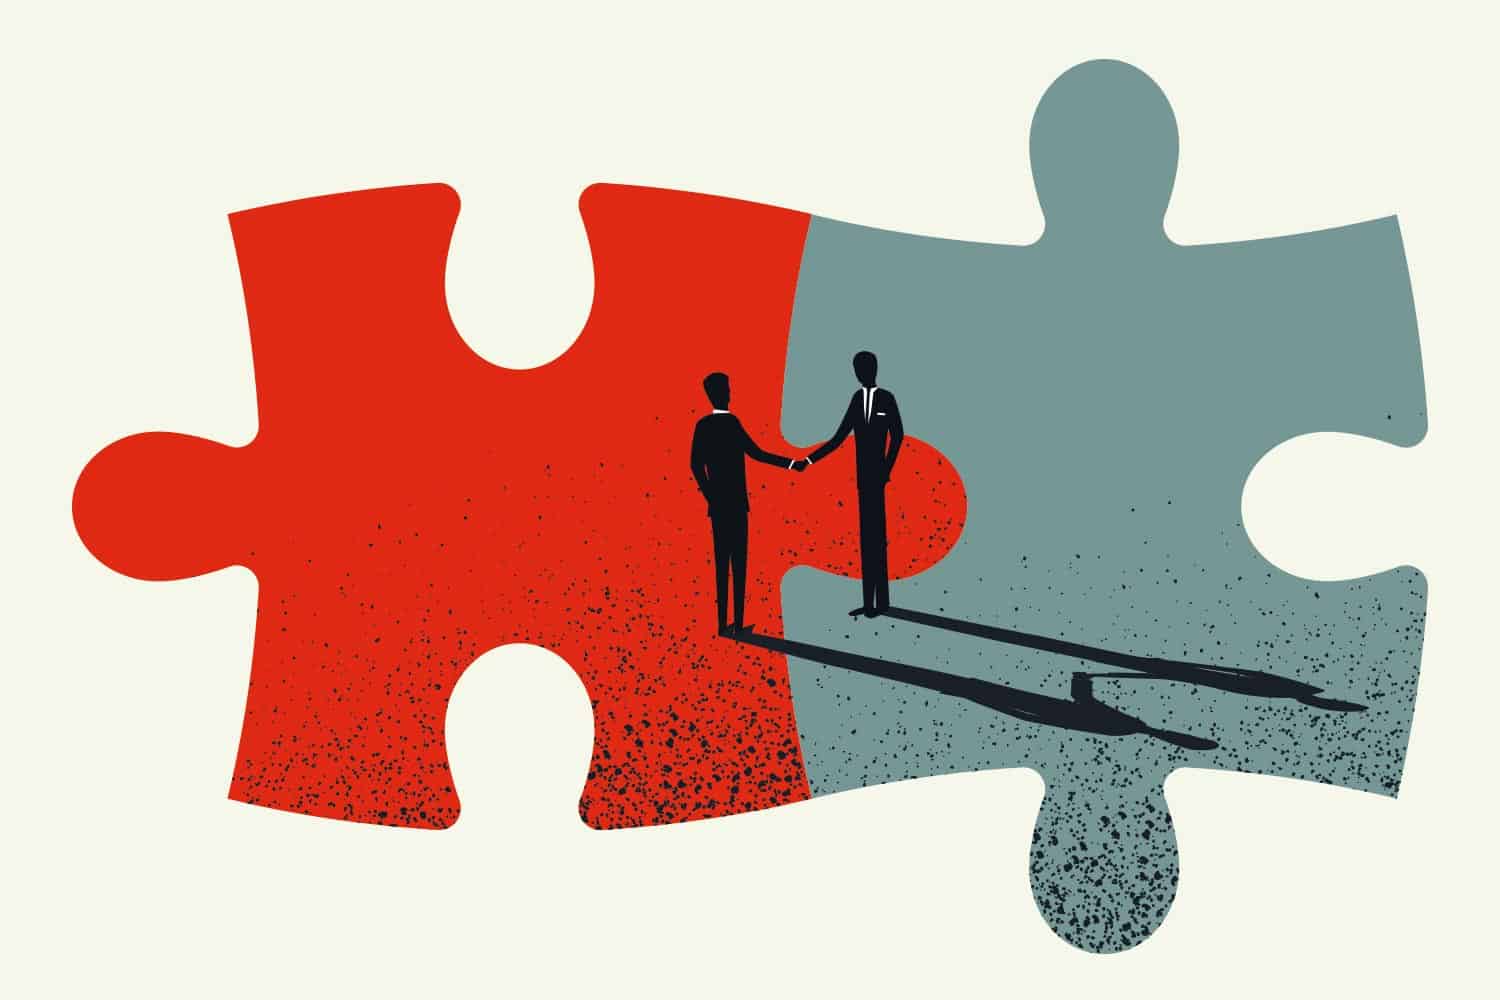 Drawing of two people shaking hands on two connected jigsaw pieces